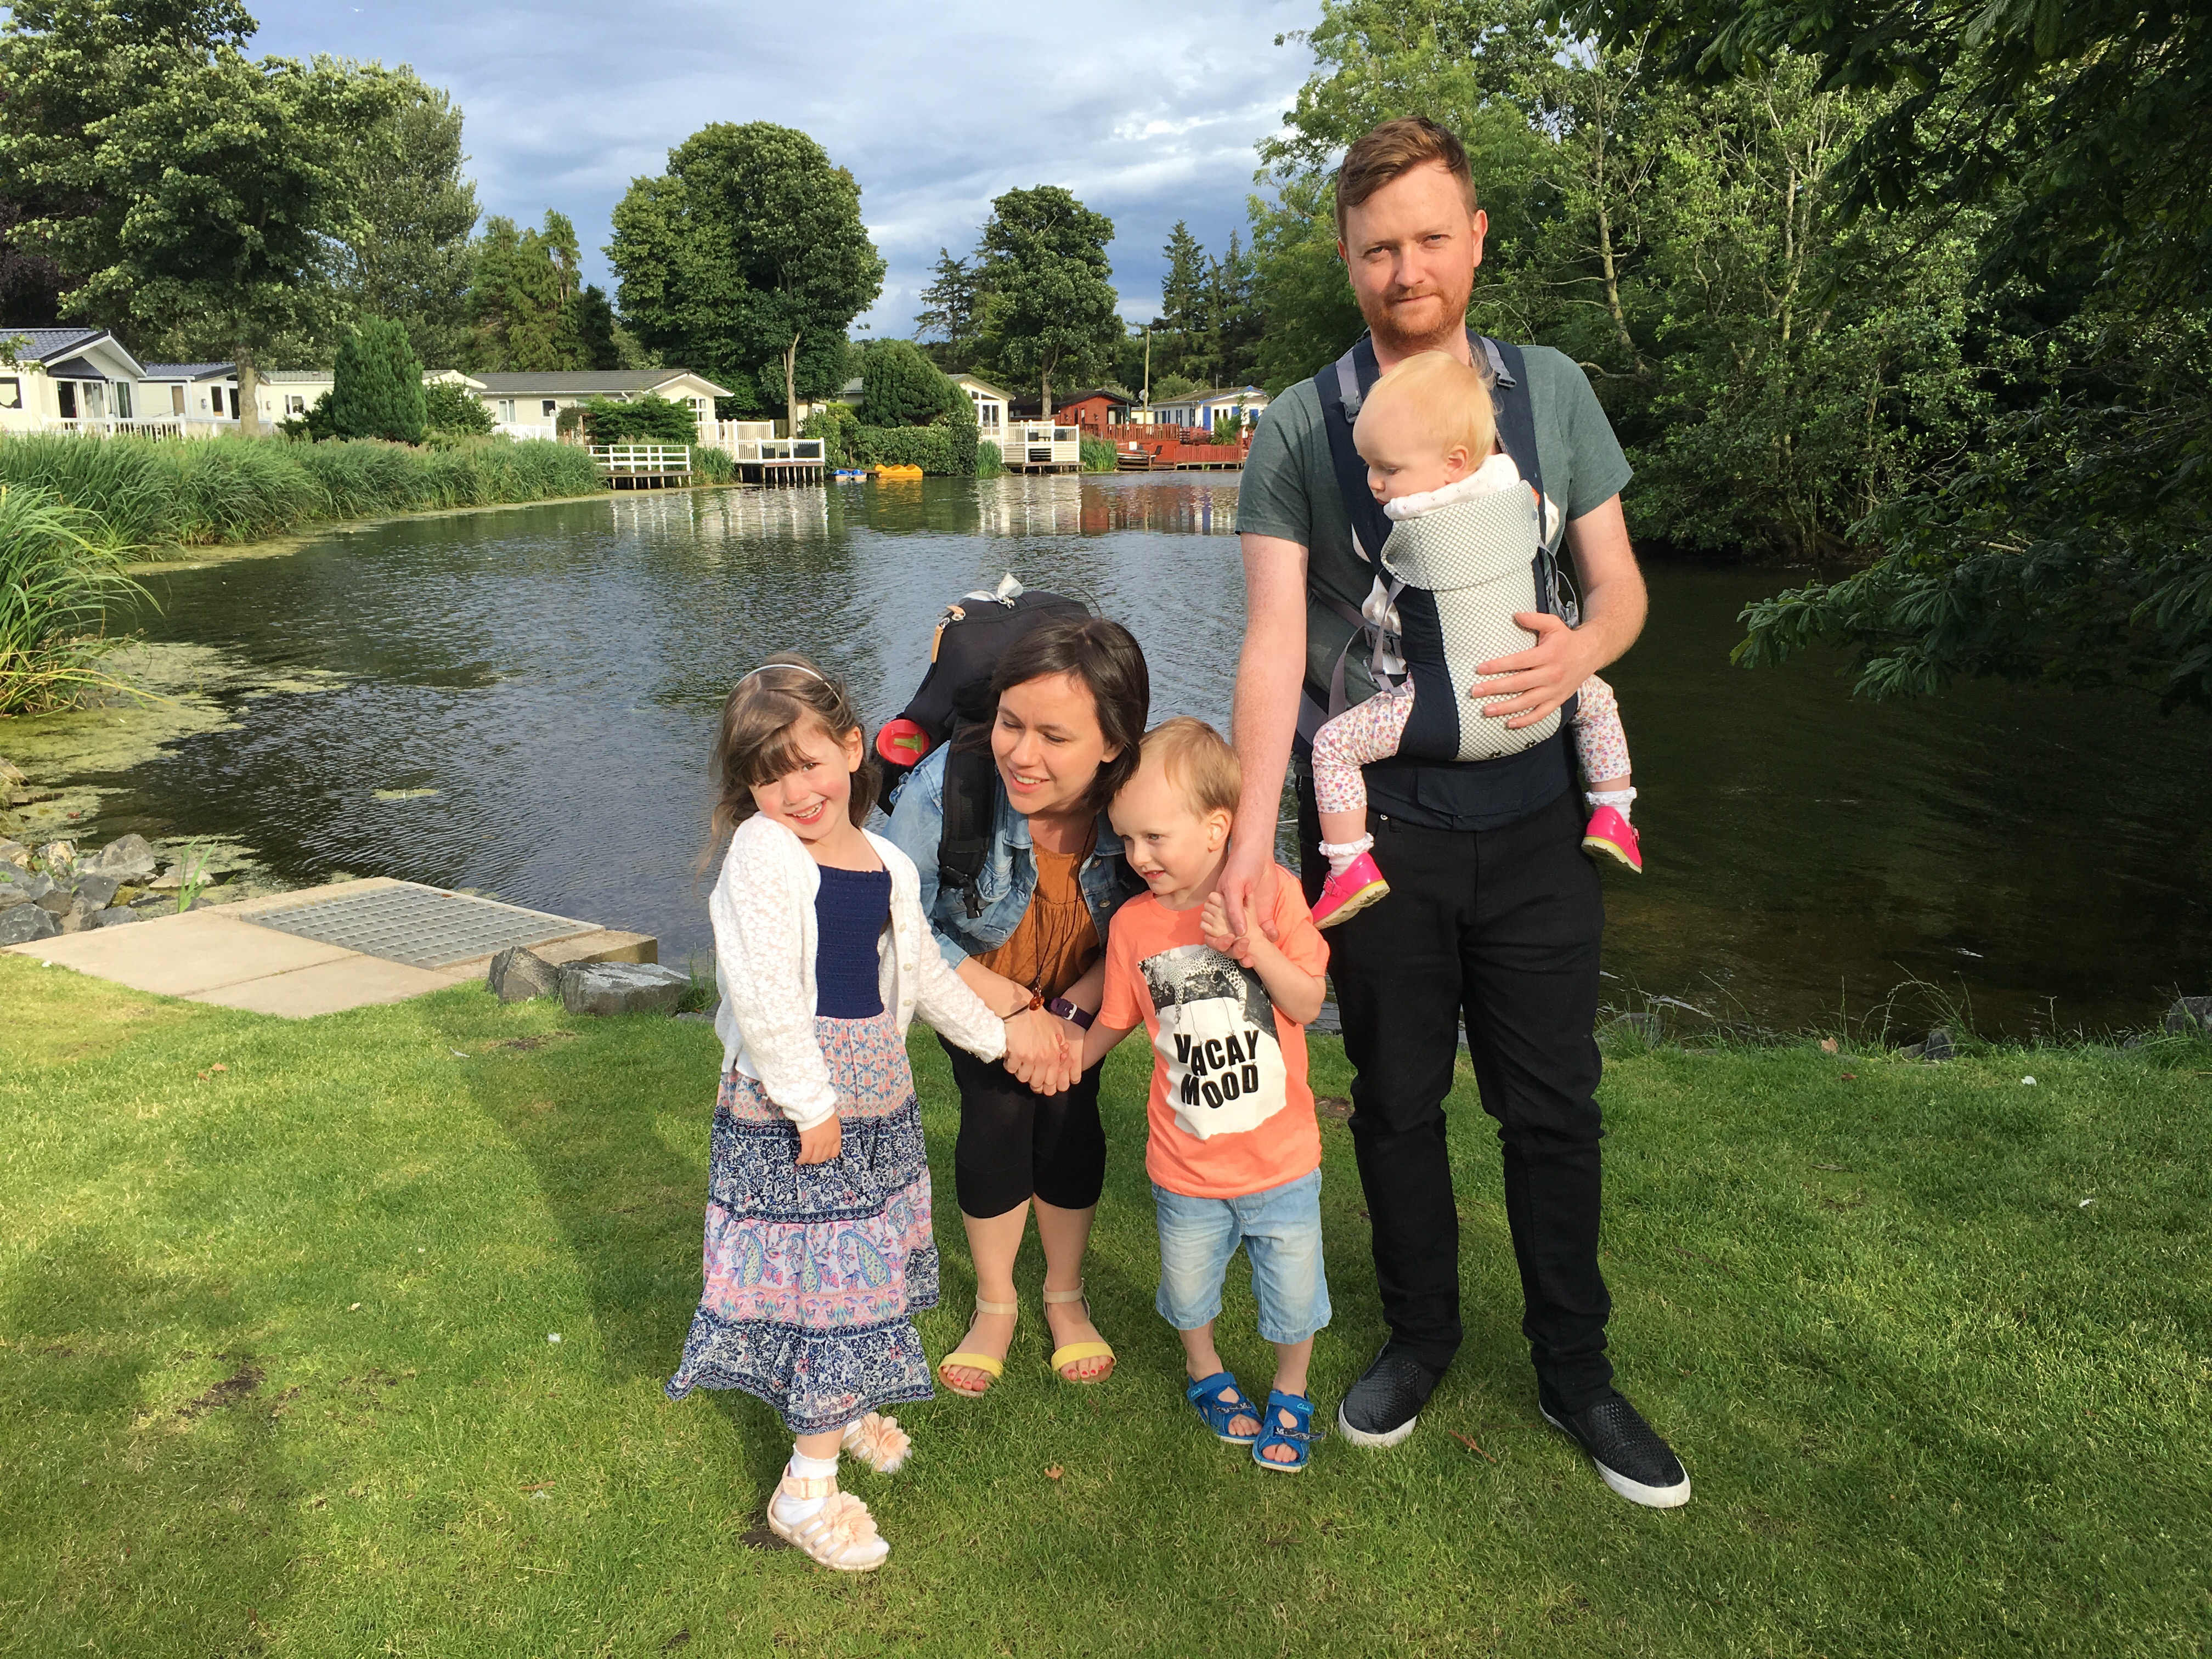 A family next to a boating lake at Haggerston Castle